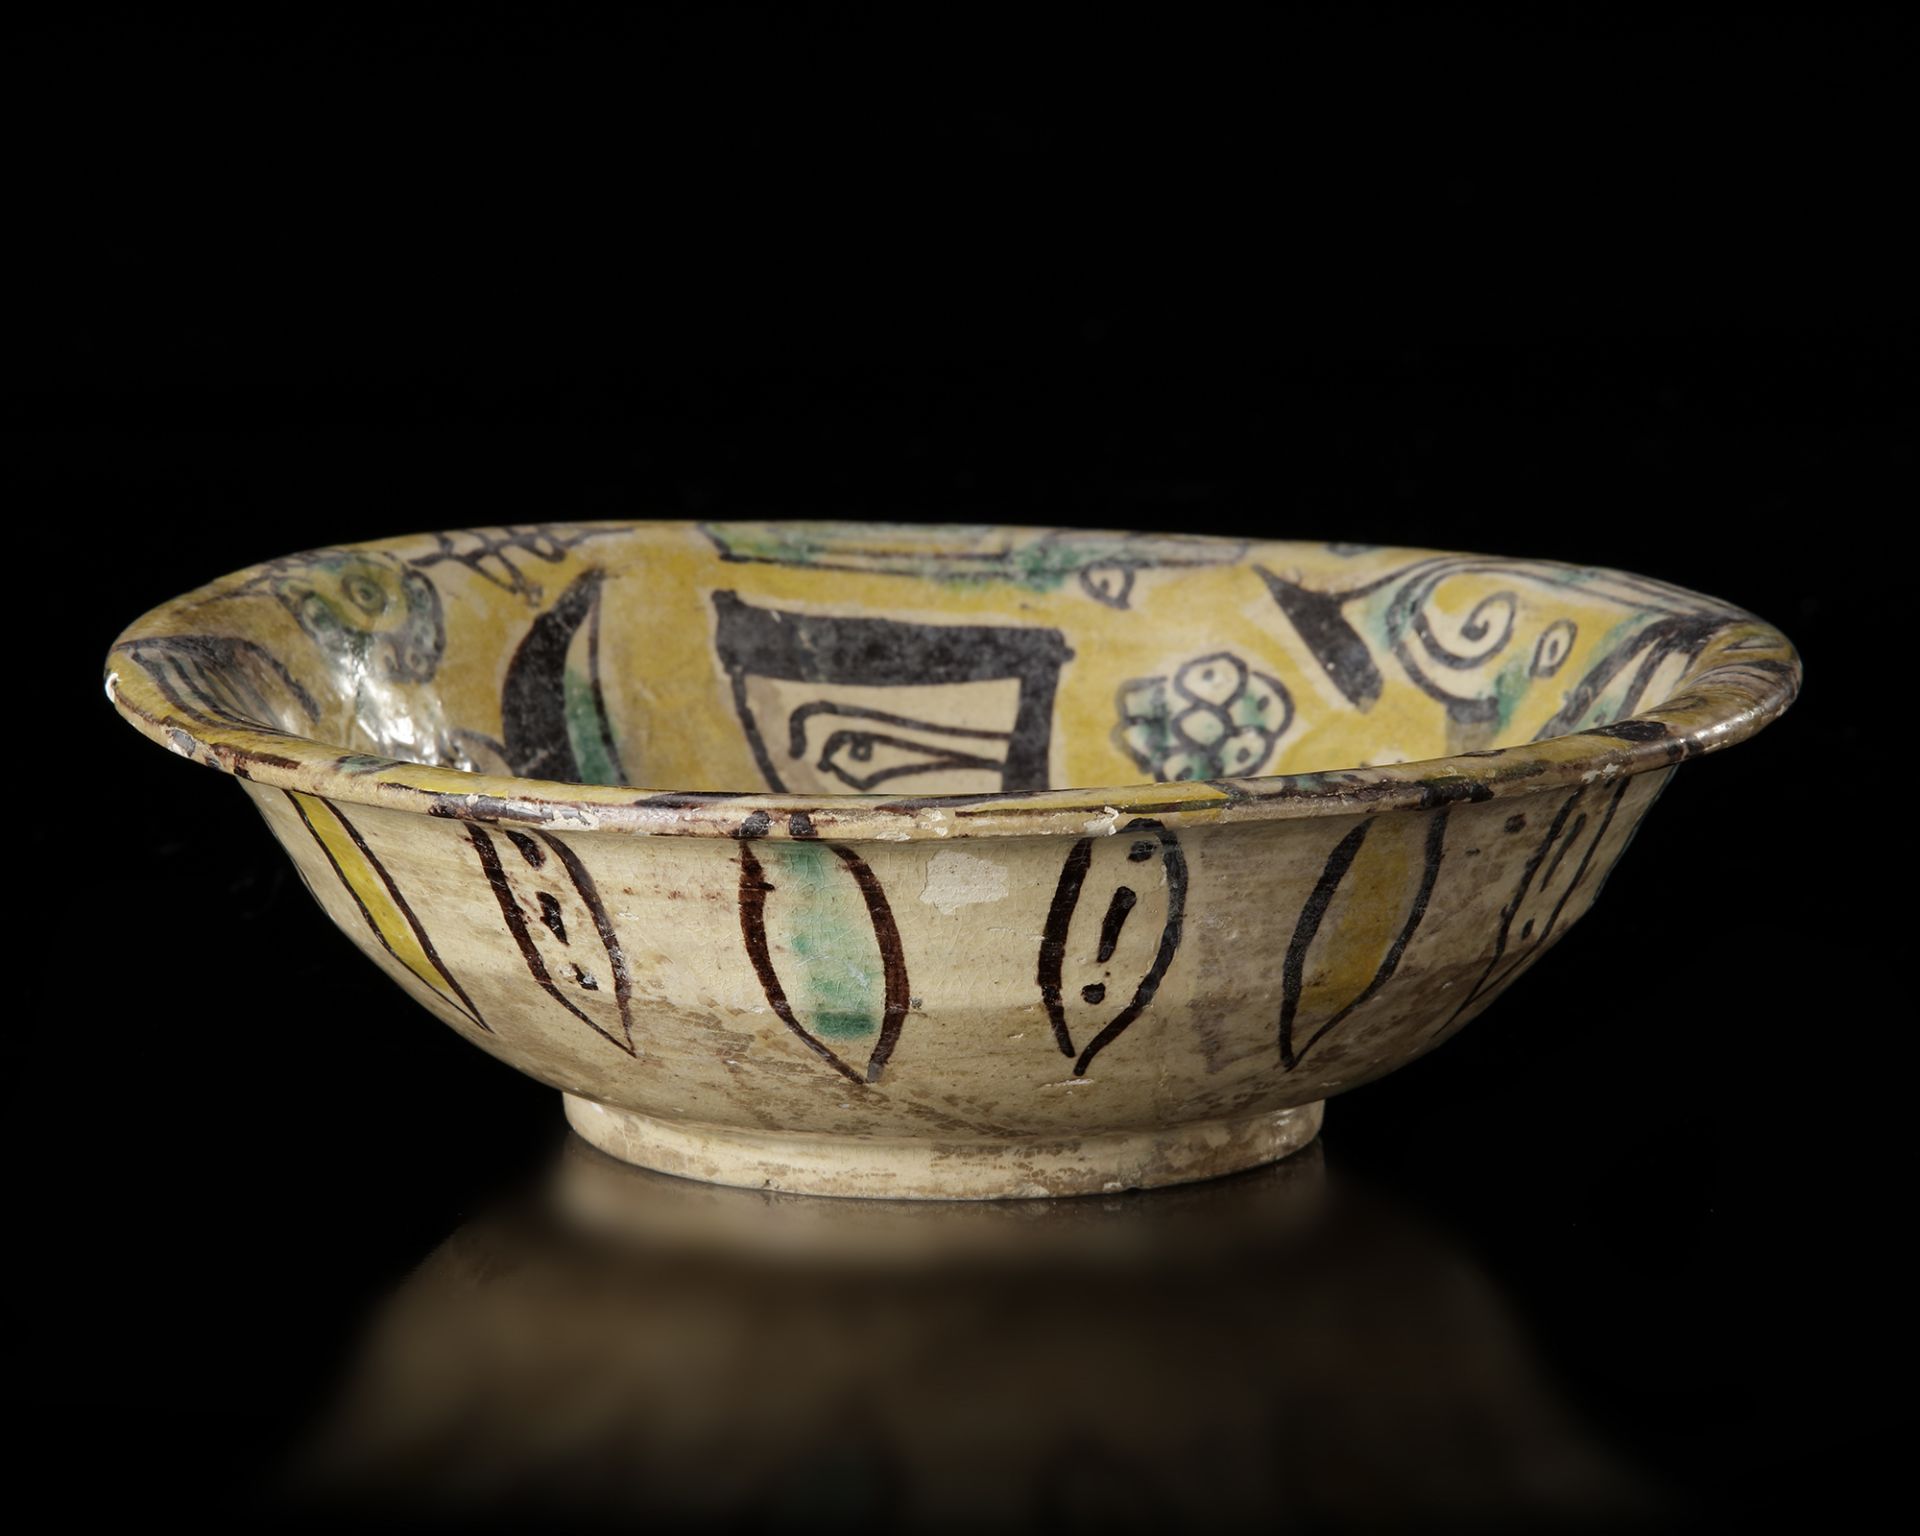 A NISHAPUR POLYCHROME DECORATED BOWL, PERSIA, 10TH CENTURY - Image 3 of 4